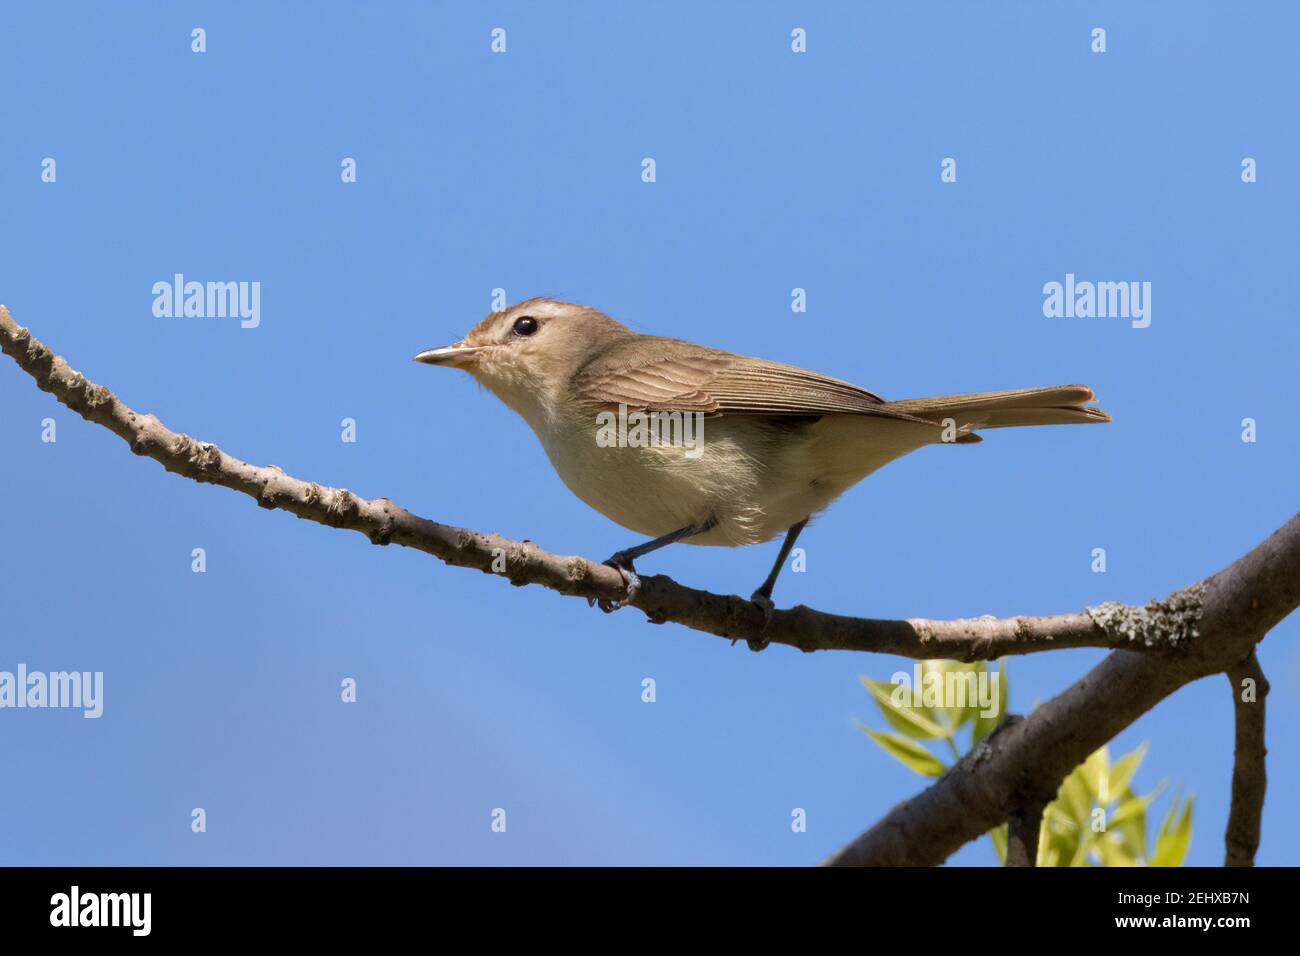 Low angle view close up of Warbling Vireo on tree branch Stock Photo